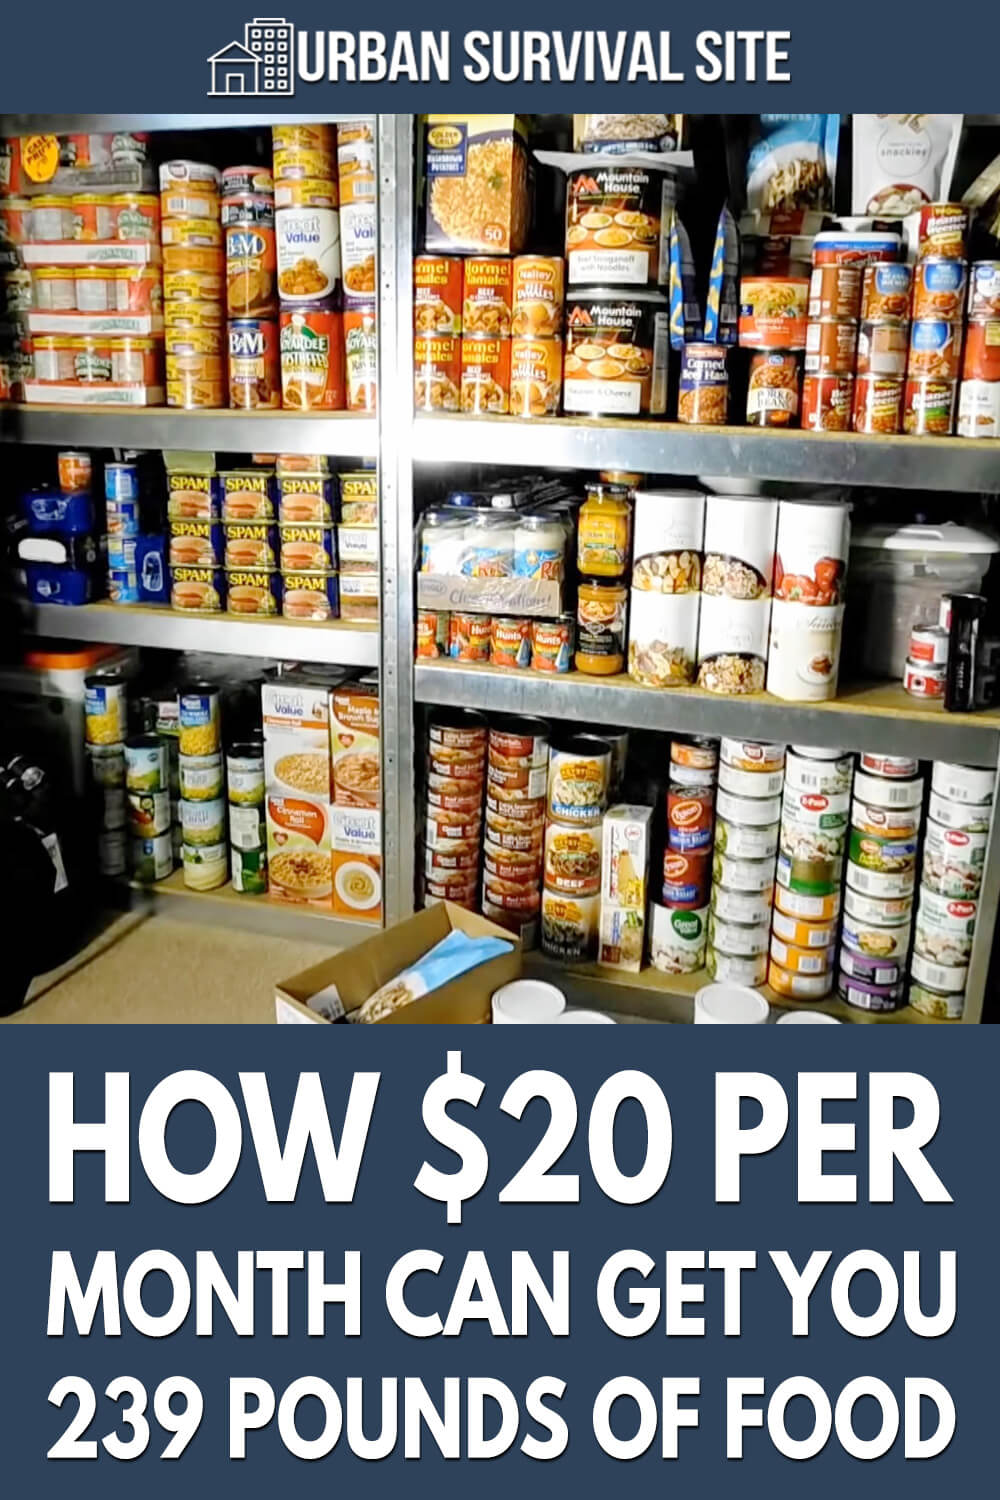 How $20 Per Month Can Get You 239 Pounds of Food